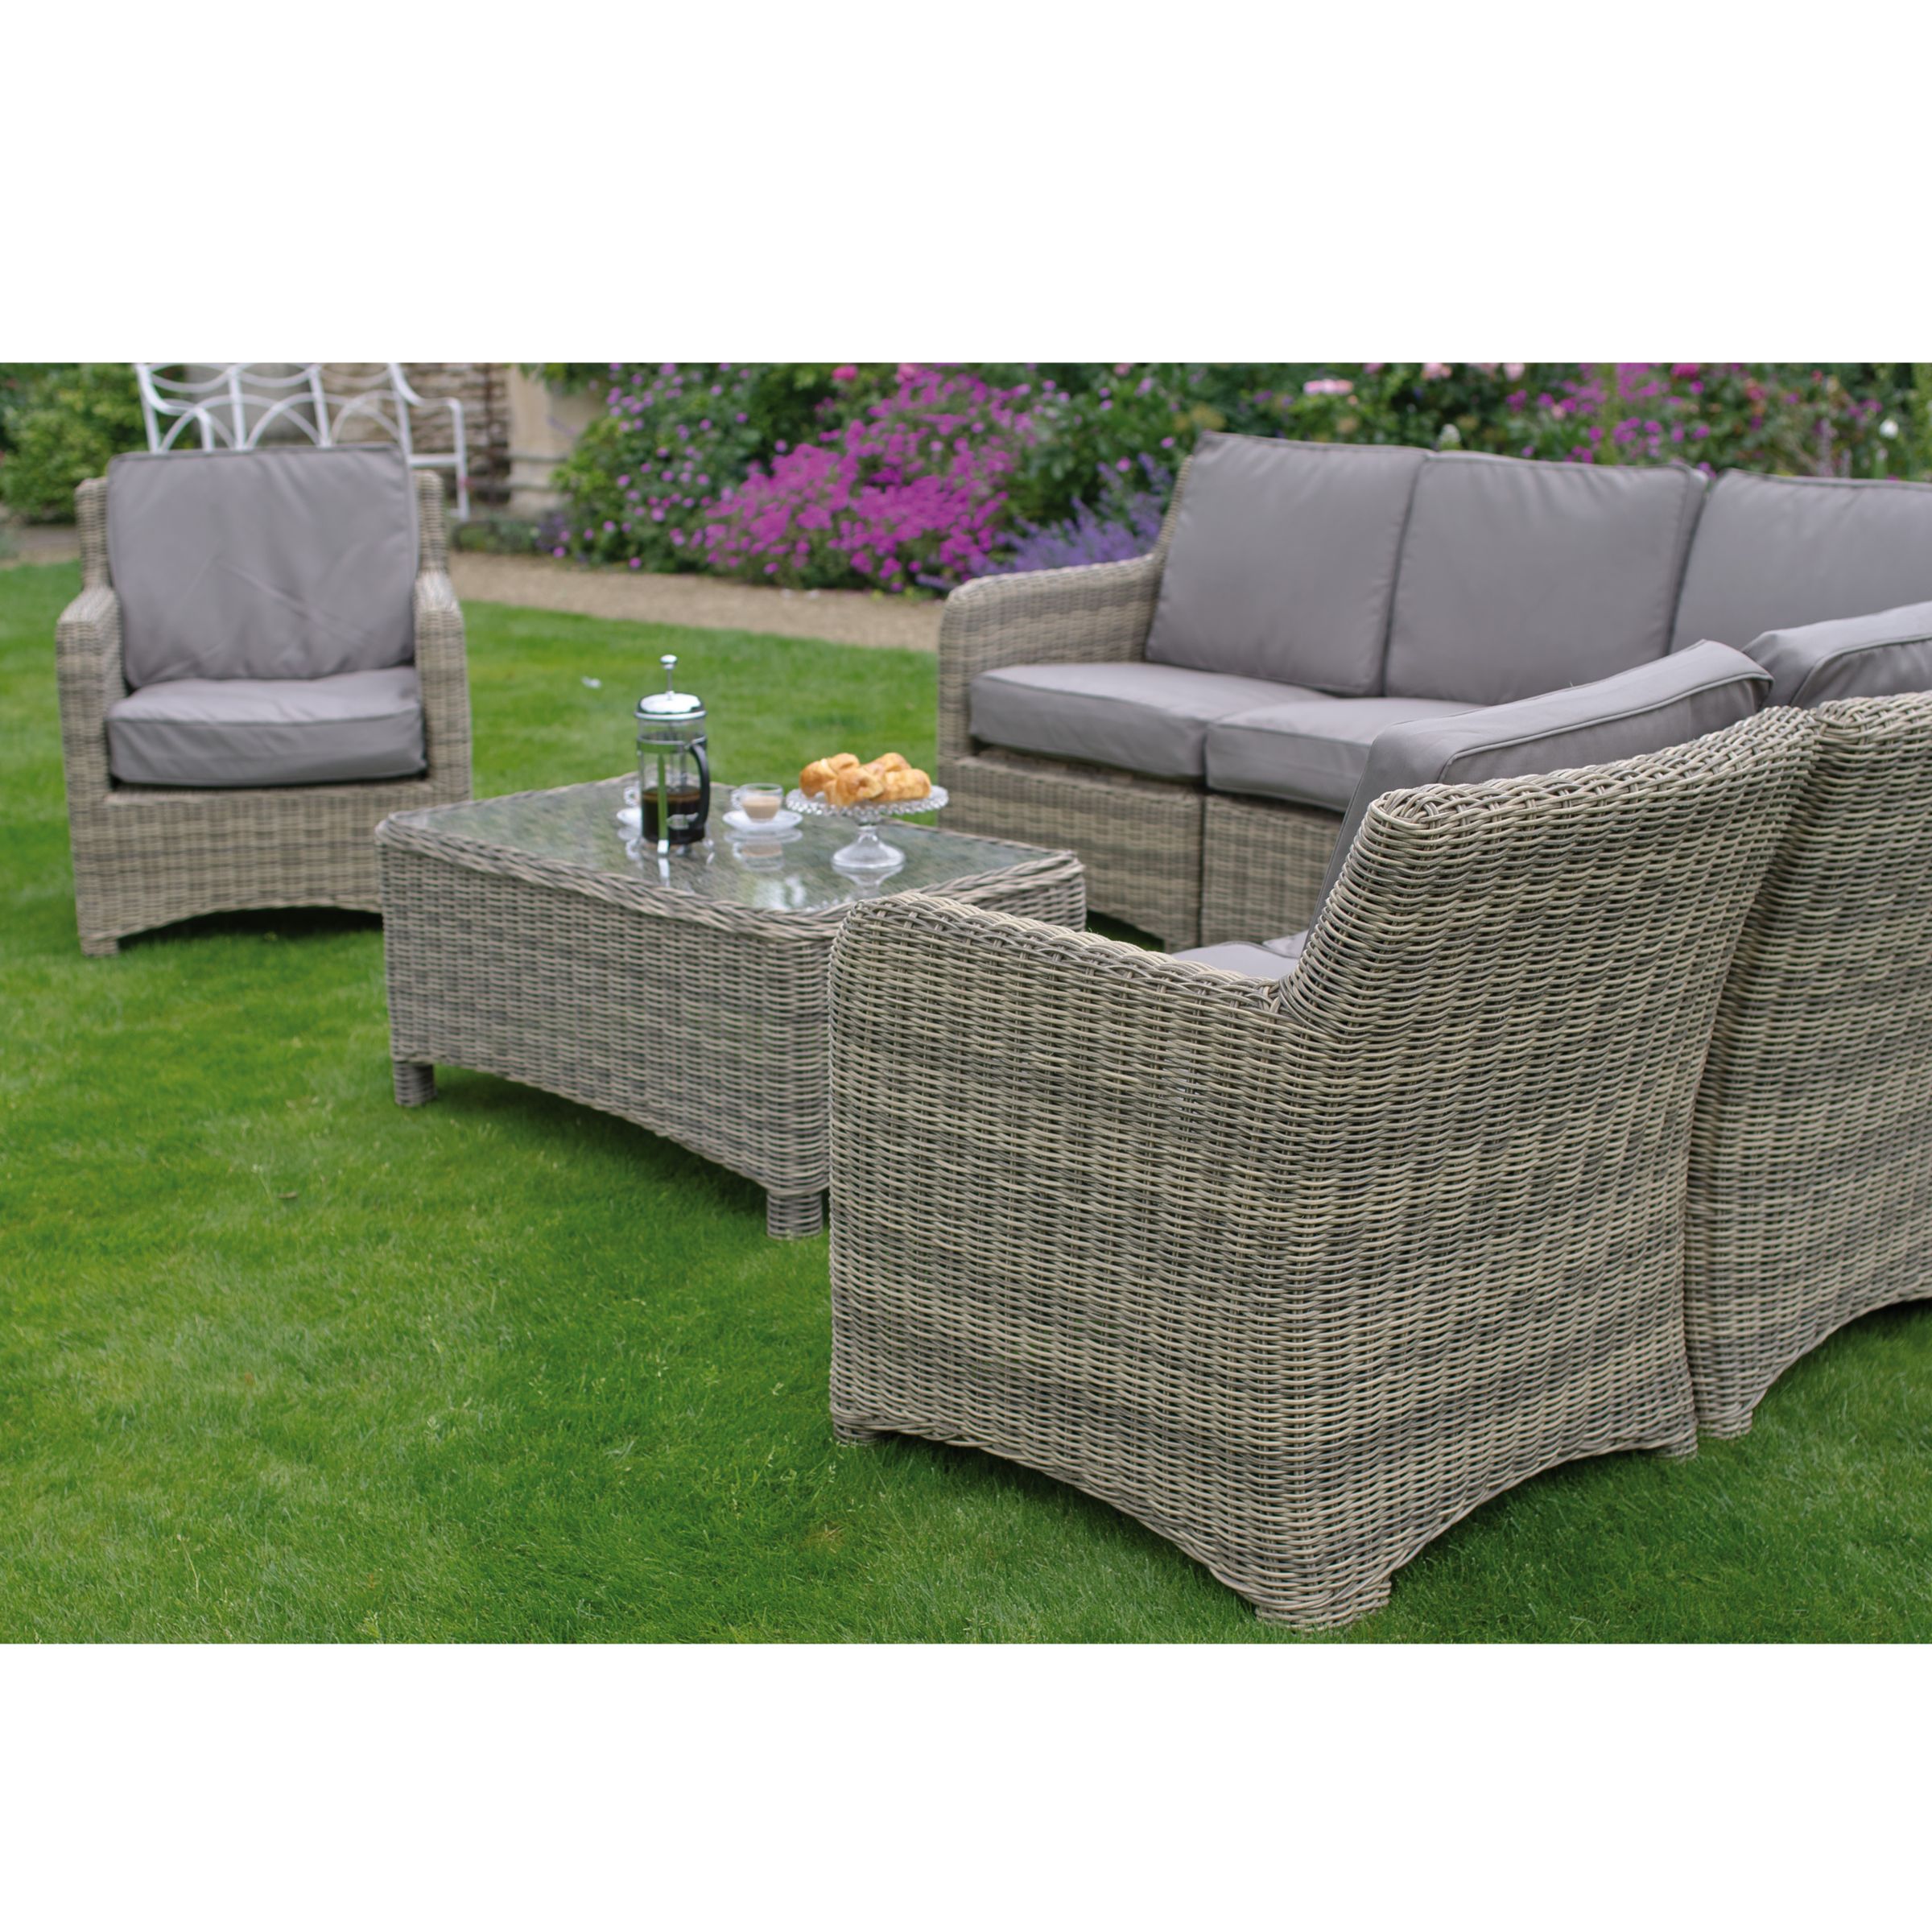 Neptune Murano Modular Outdoor Corner Group with Coffee Table and Chair, Warm Slate